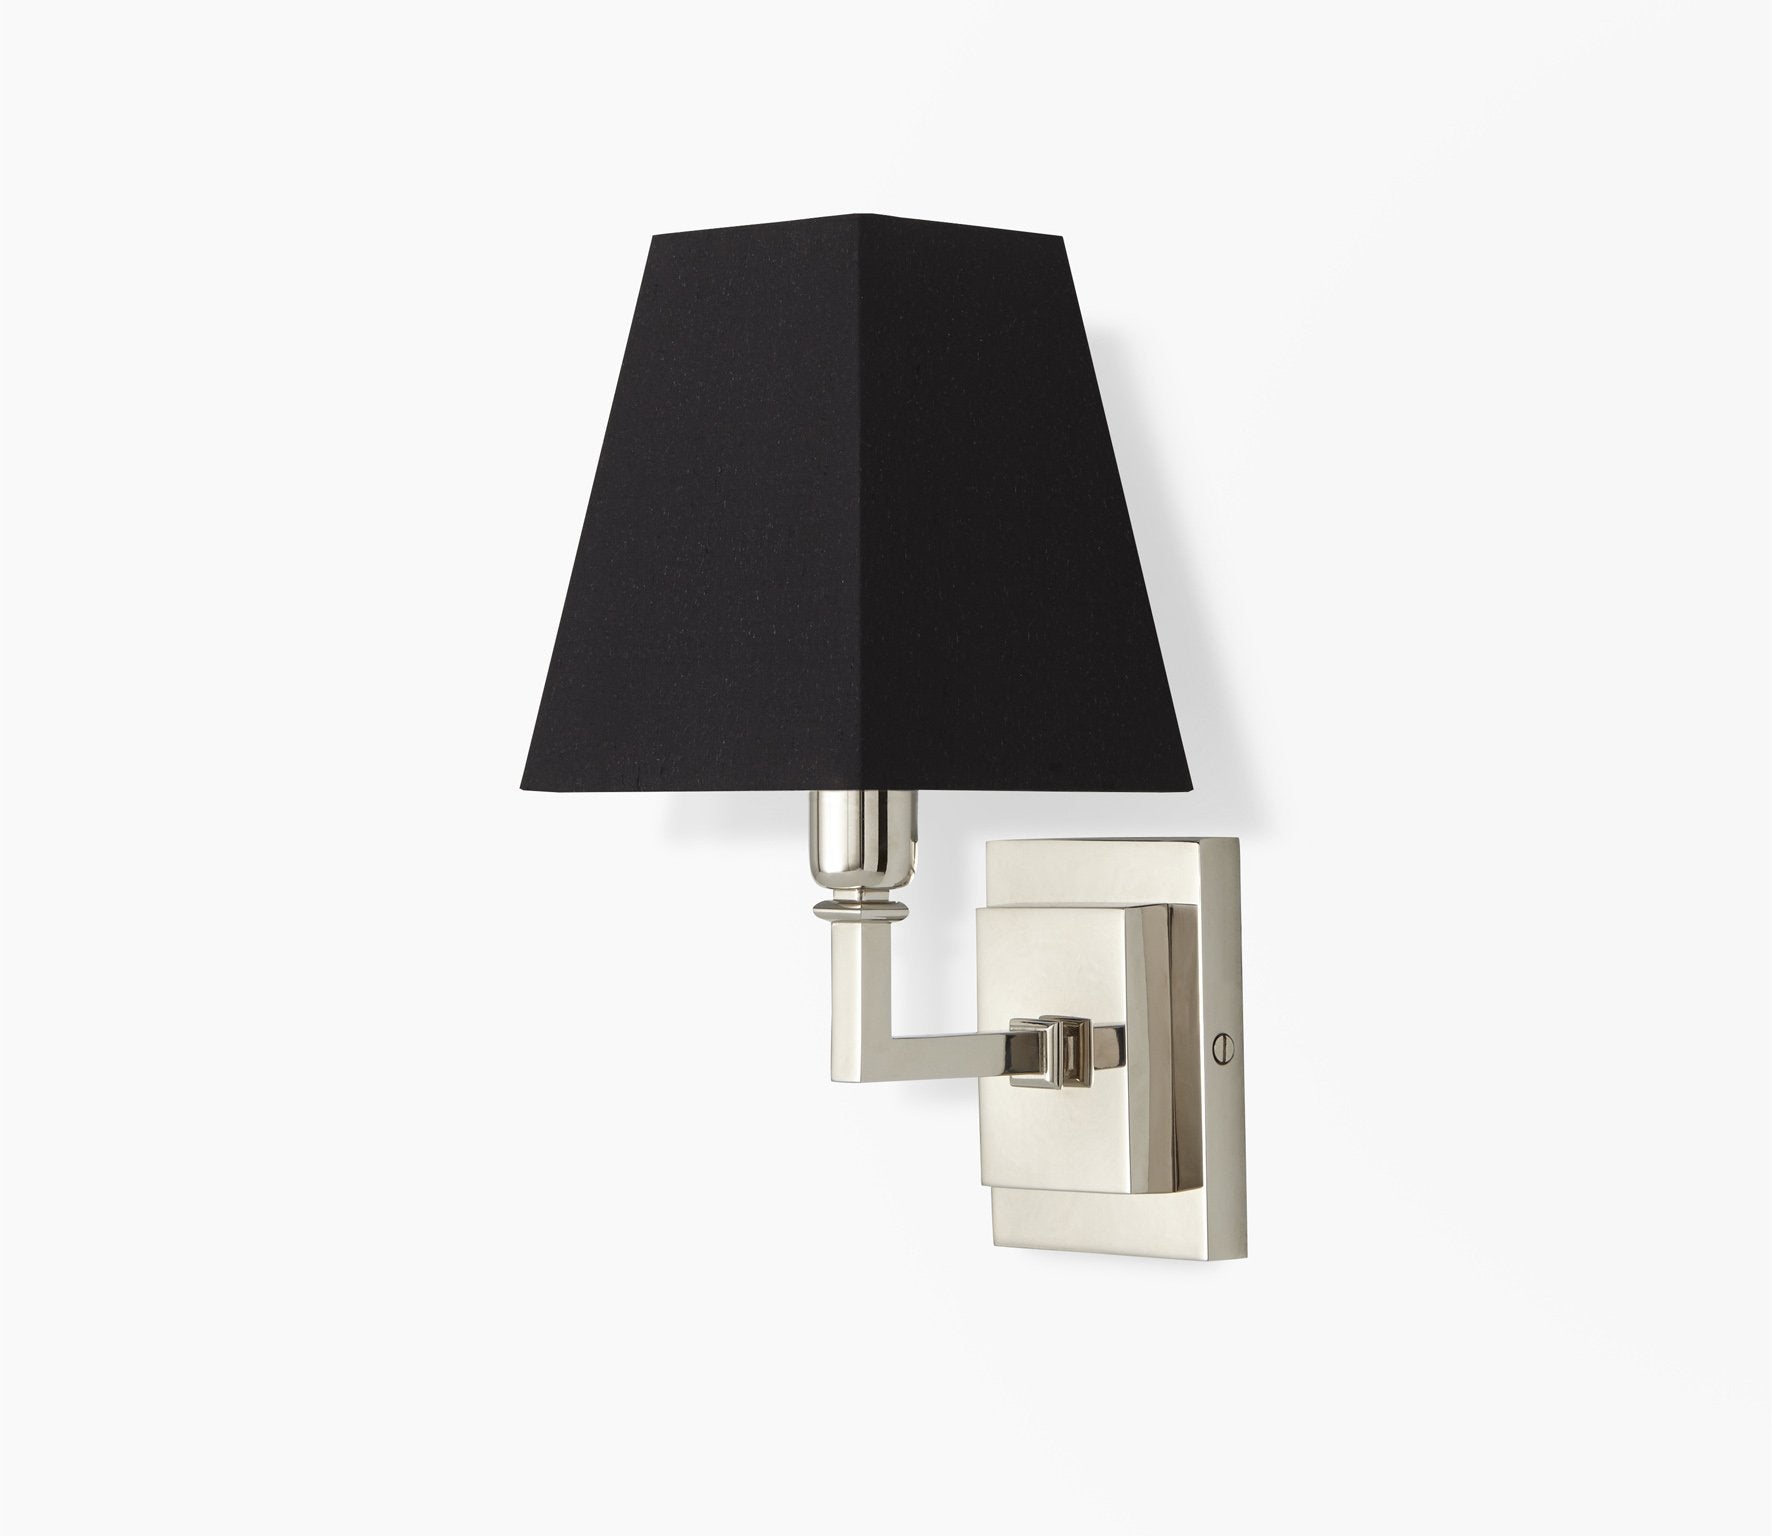 Parker Wall Light with Pyramid Shade Product Image 1